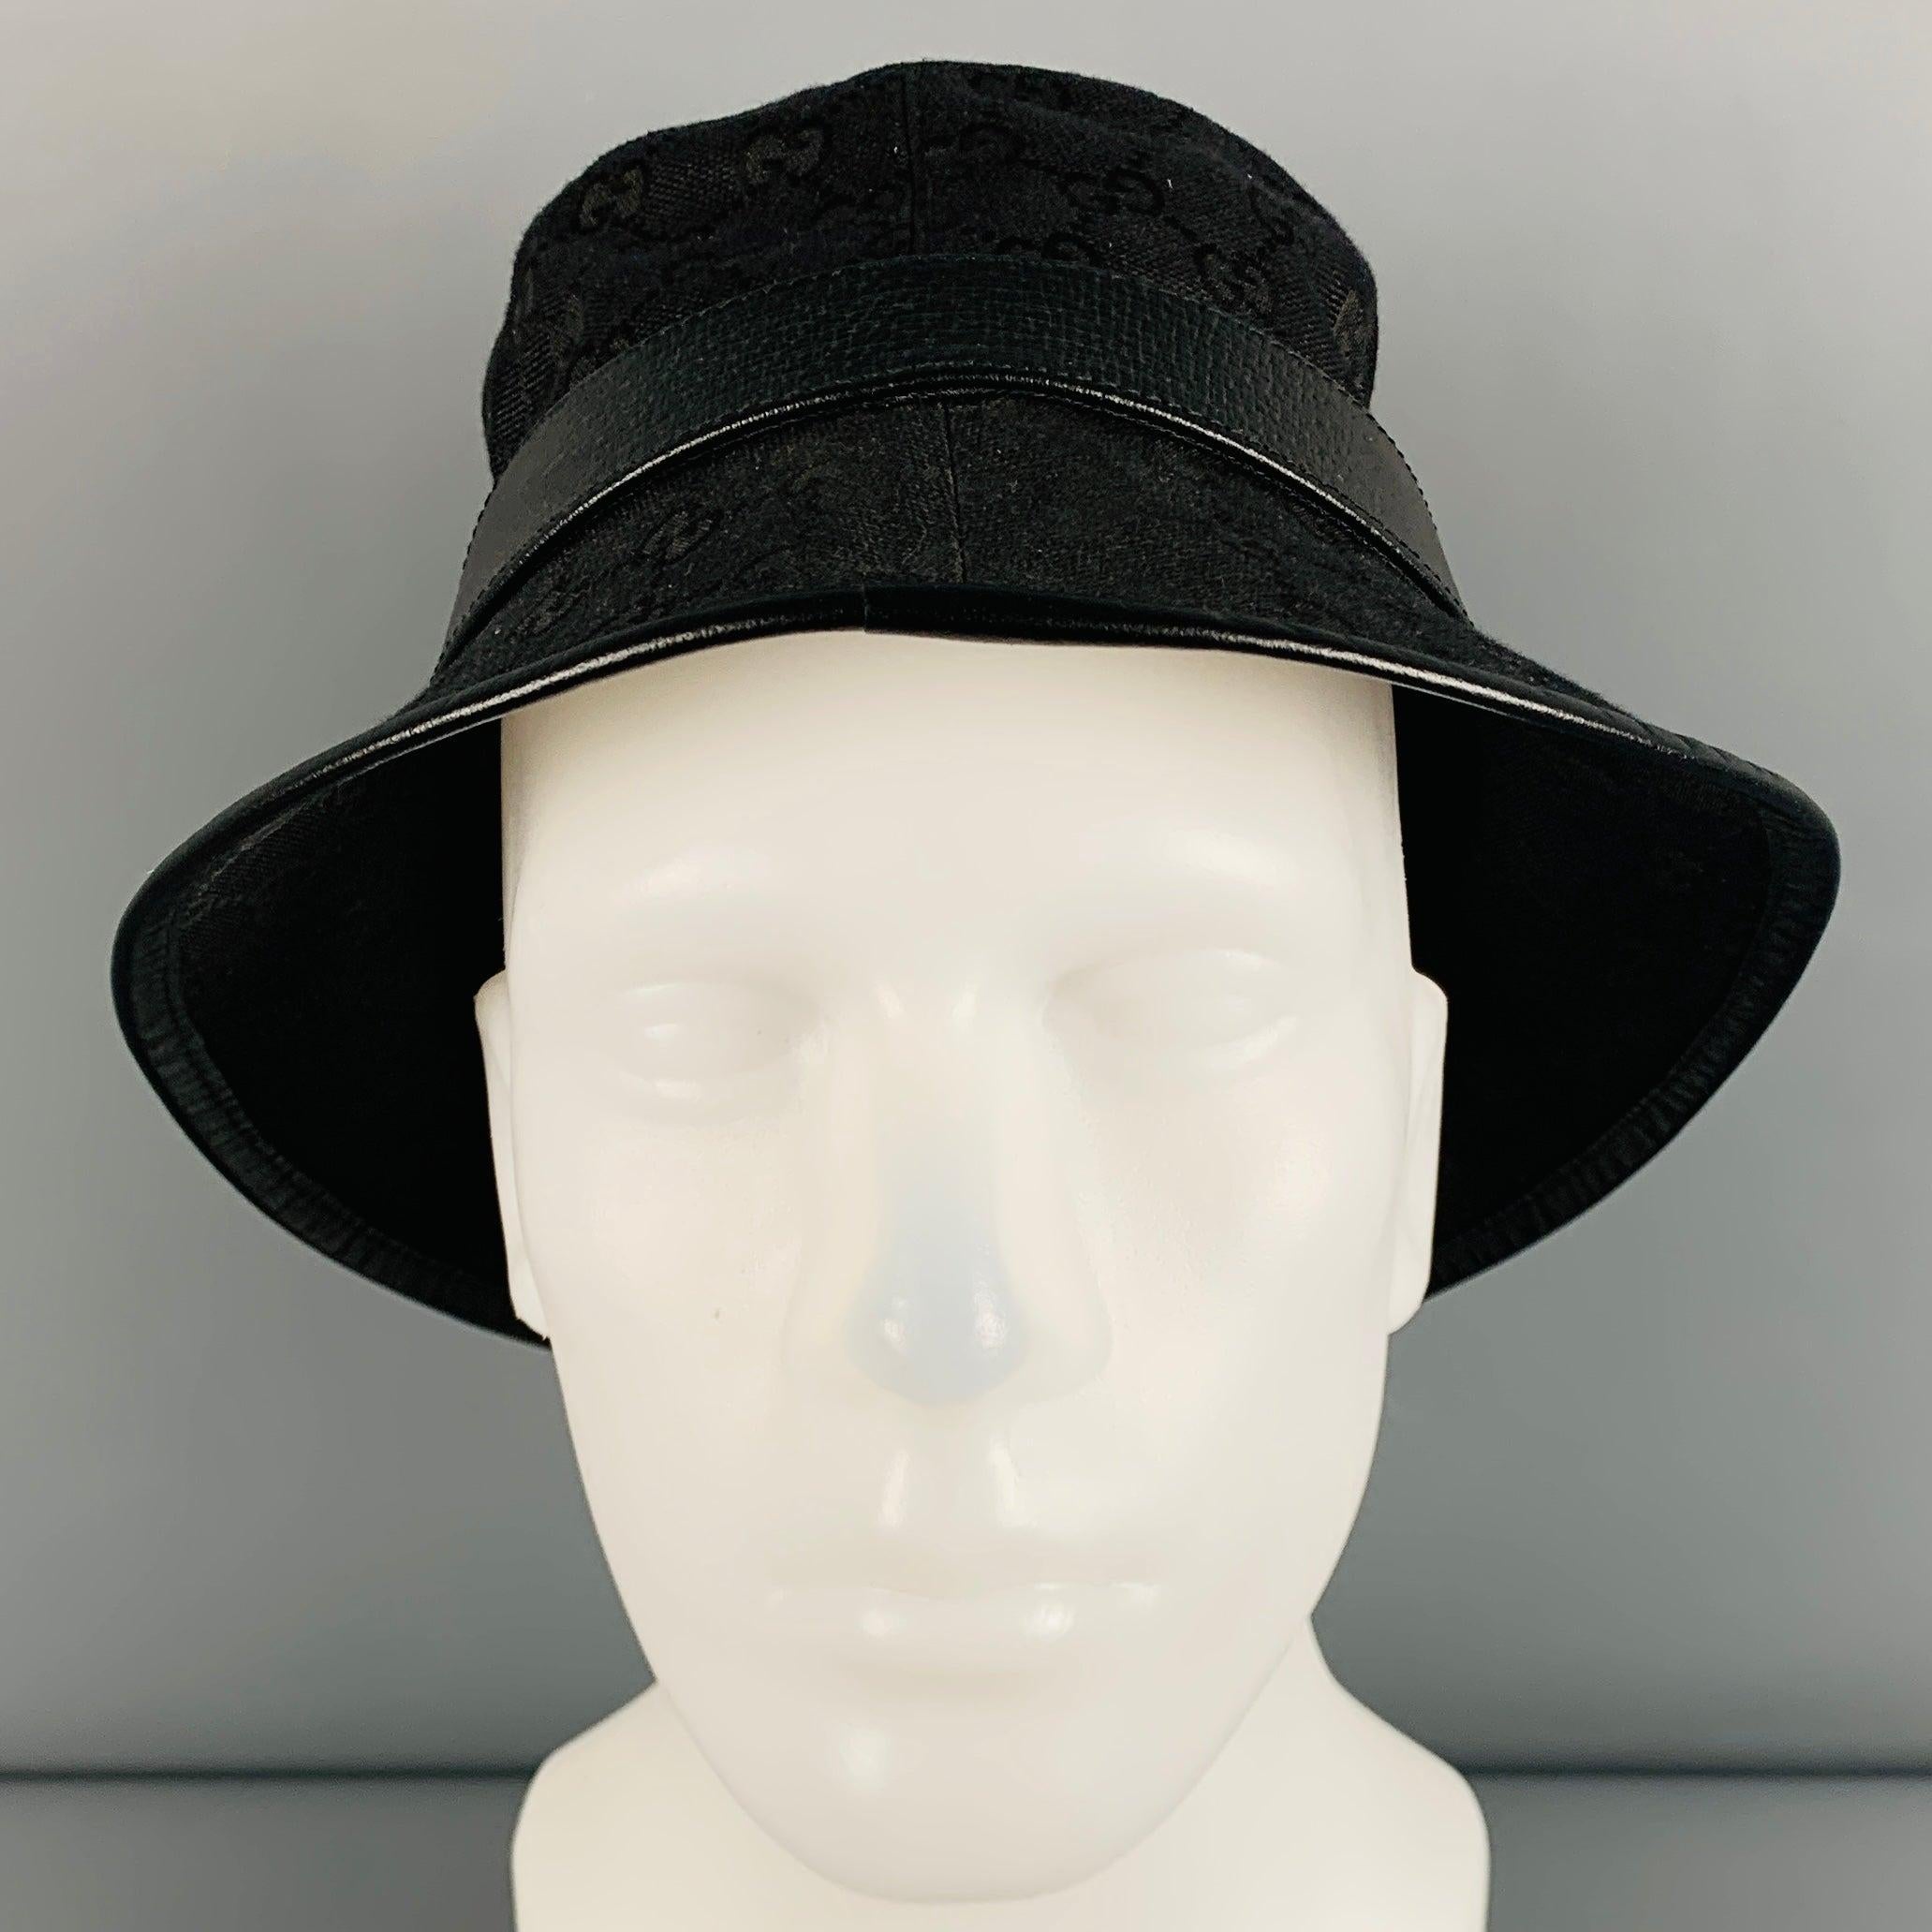 GUCCI hat in a
black polyester blend fabric featuring a bucket style, all over logo pattern, leather trim, and brass metal double GG detail.Very Good Pre-Owned Condition. Minor signs of wear. 

Marked:   S/57cm 

Measurements: 
  Opening: 22 inches